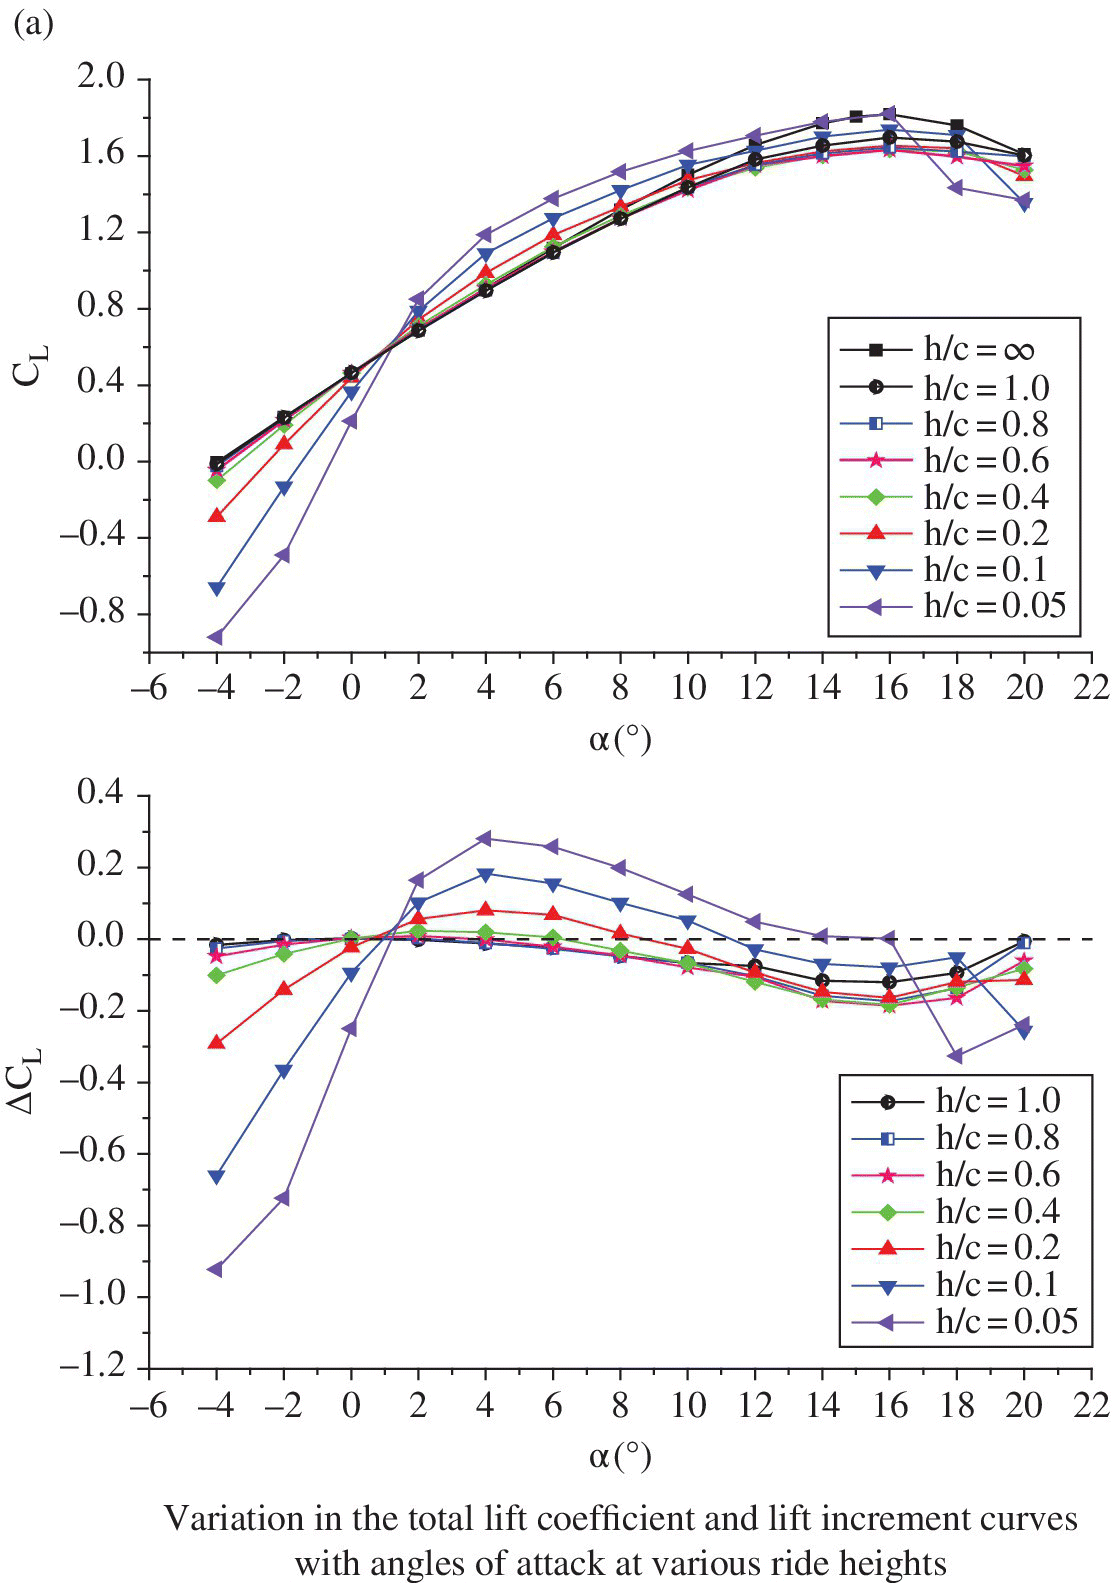 Top: Graph of CL vs. α displaying 8 ascending curves for h/c = ∞, 1.0, 0.8, 0.6, 0.4, 0.2, 0.1, and 0.05. Bottom: Graph of ΔCL vs. α displaying 7 discrete curves for h/c = 1.0, 0.8, 0.6, 0.4, 0.2, 0.1, and 0.05.